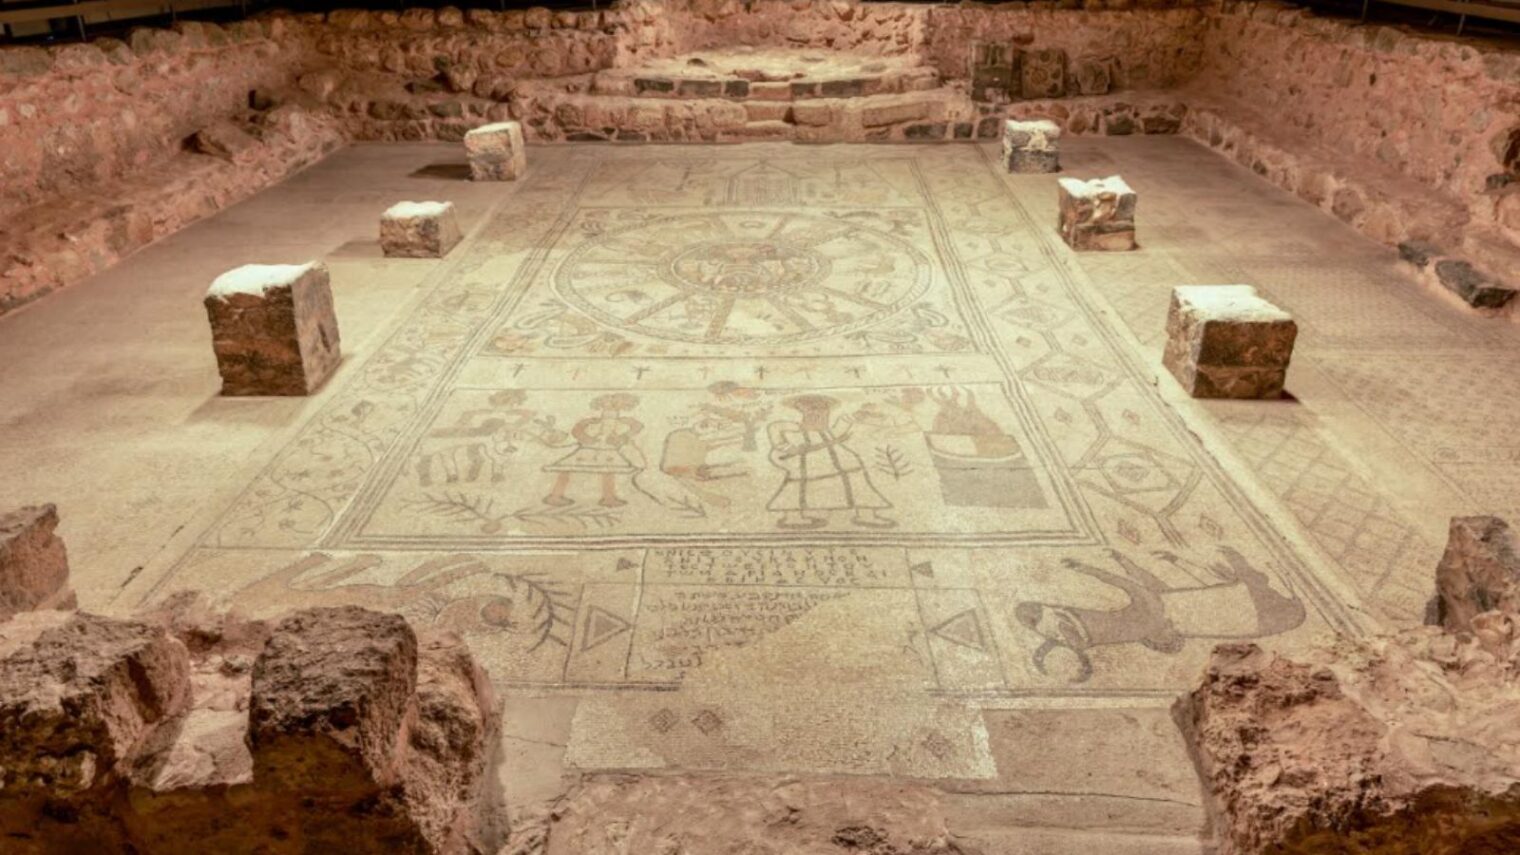 The magnificent mosaic at the fifth century Beit Alpha synagogue in northern Israel depicts Jewish themes such as a tabernacle, menorahs, an etrog, a shofar and lions; a zodiac featuring the Greek sun god Helios surrounded by the Hebrew name for each star sign and female figures representing the four seasons; and the biblical story of the binding of Isaac. The father-and-son artisans Mariunus and Hanina inscribed their names into the mosaic. Photo by Boaz Eshkol